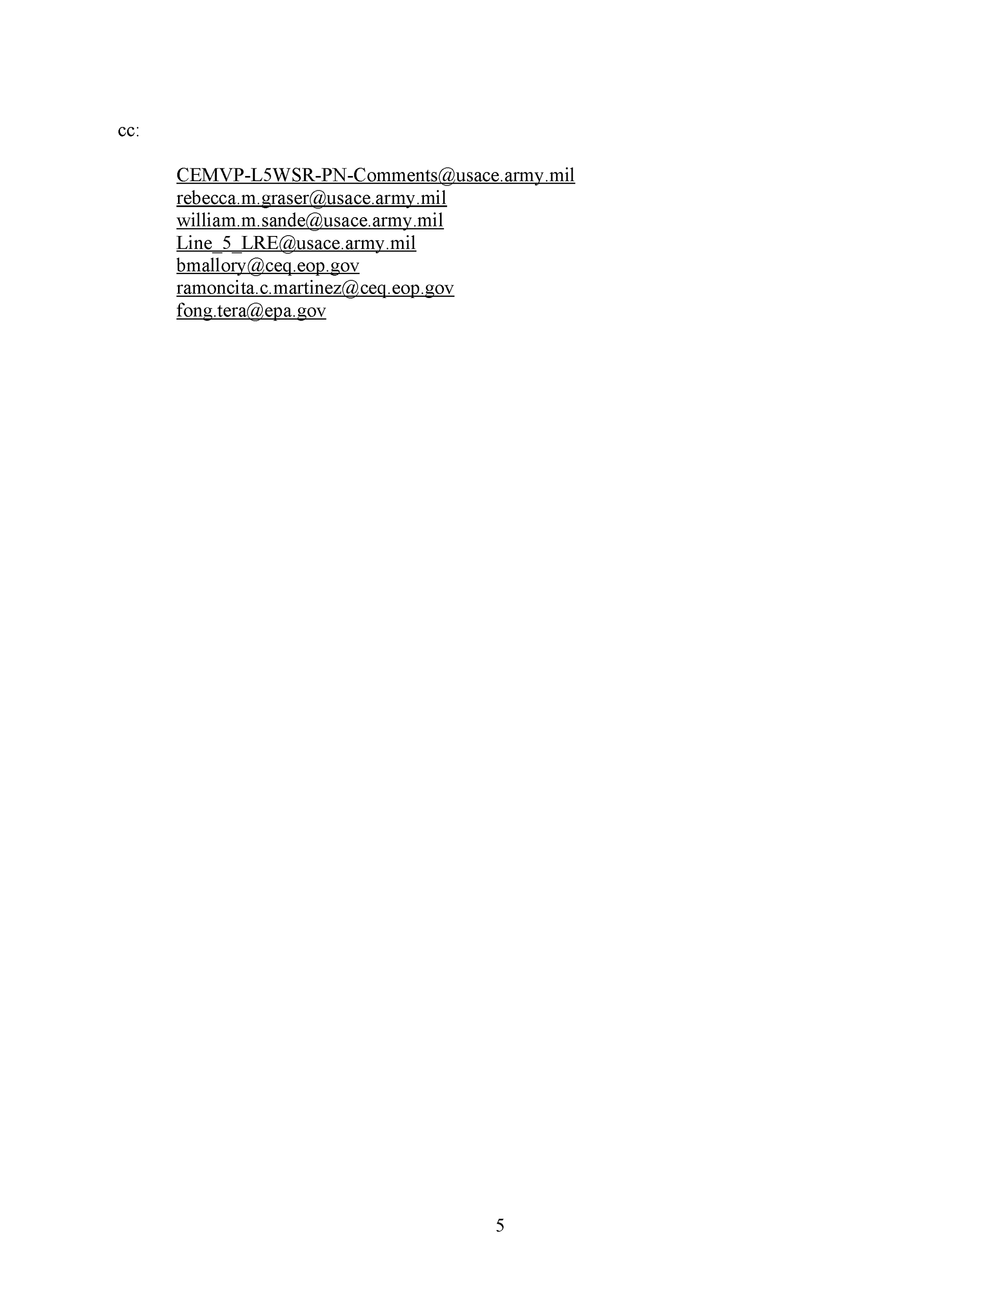 2022-08-29 - MEA L5 Env Rev Ltr to Corps_Page_5.png